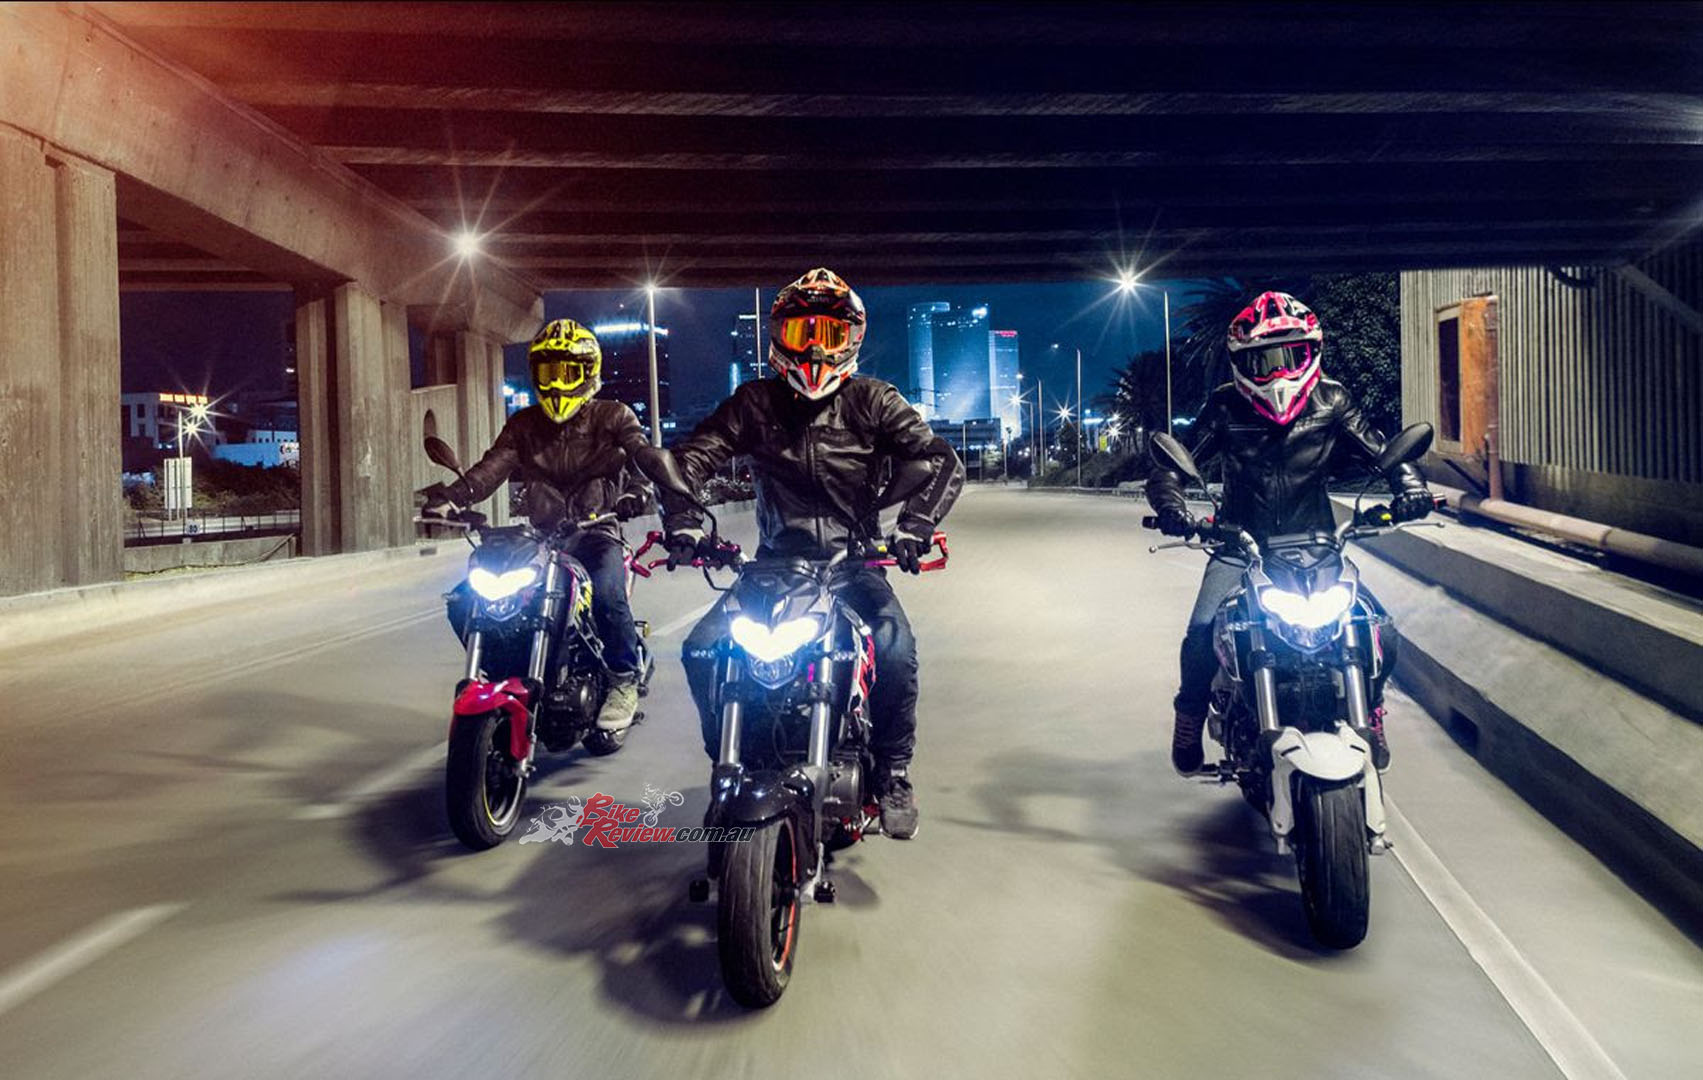 Save $600 on the price of the Benelli TNT 125, now $3,990 ride away until 31 March.